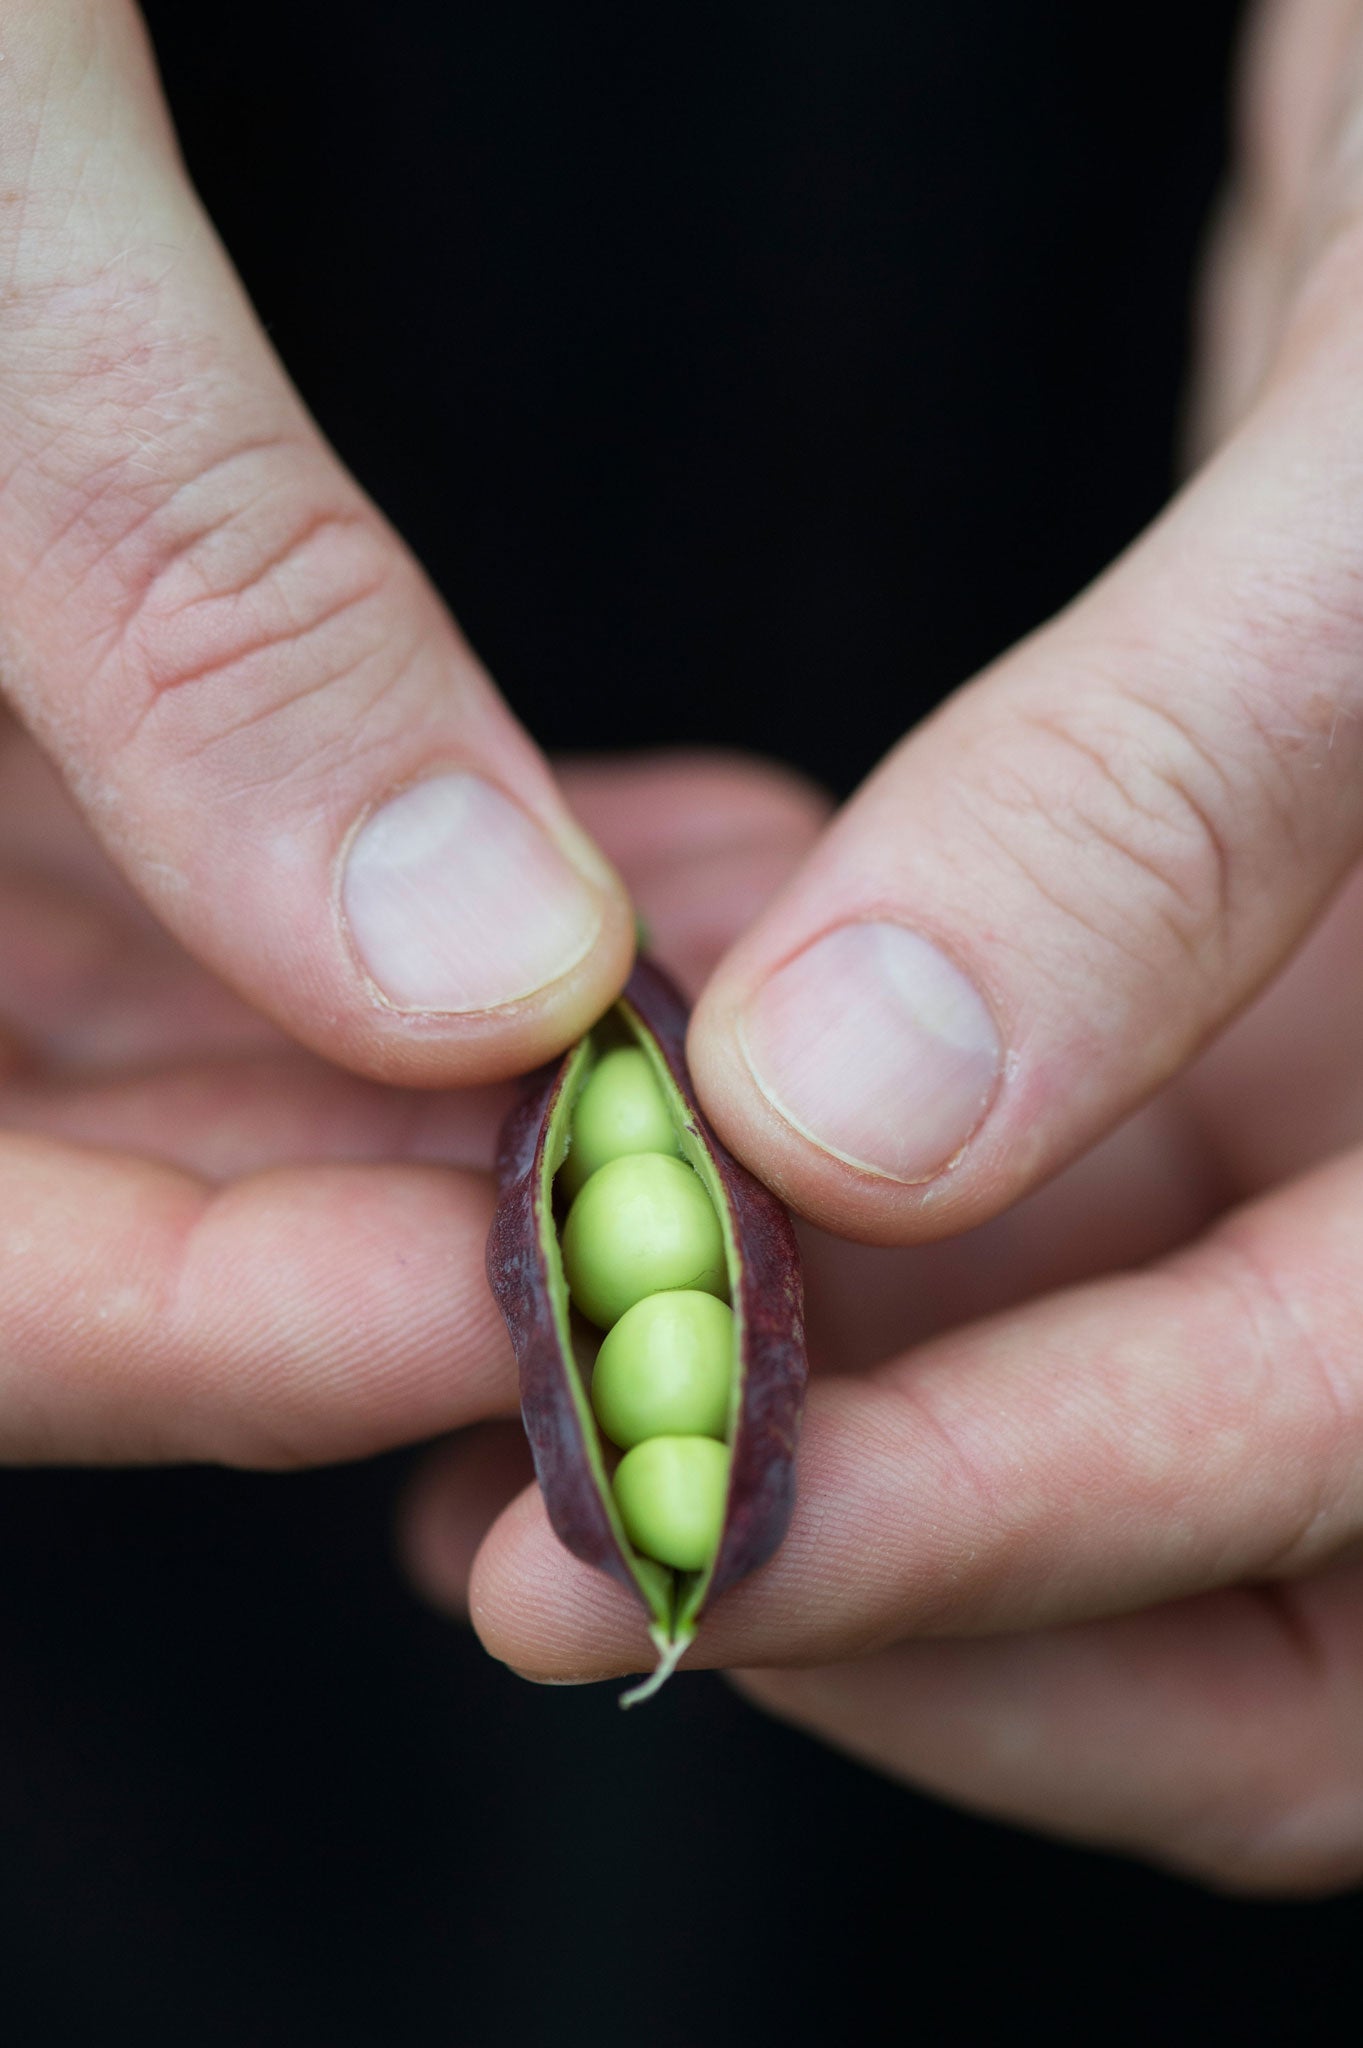 Like potatoes, peas are divided into earlies and main crops